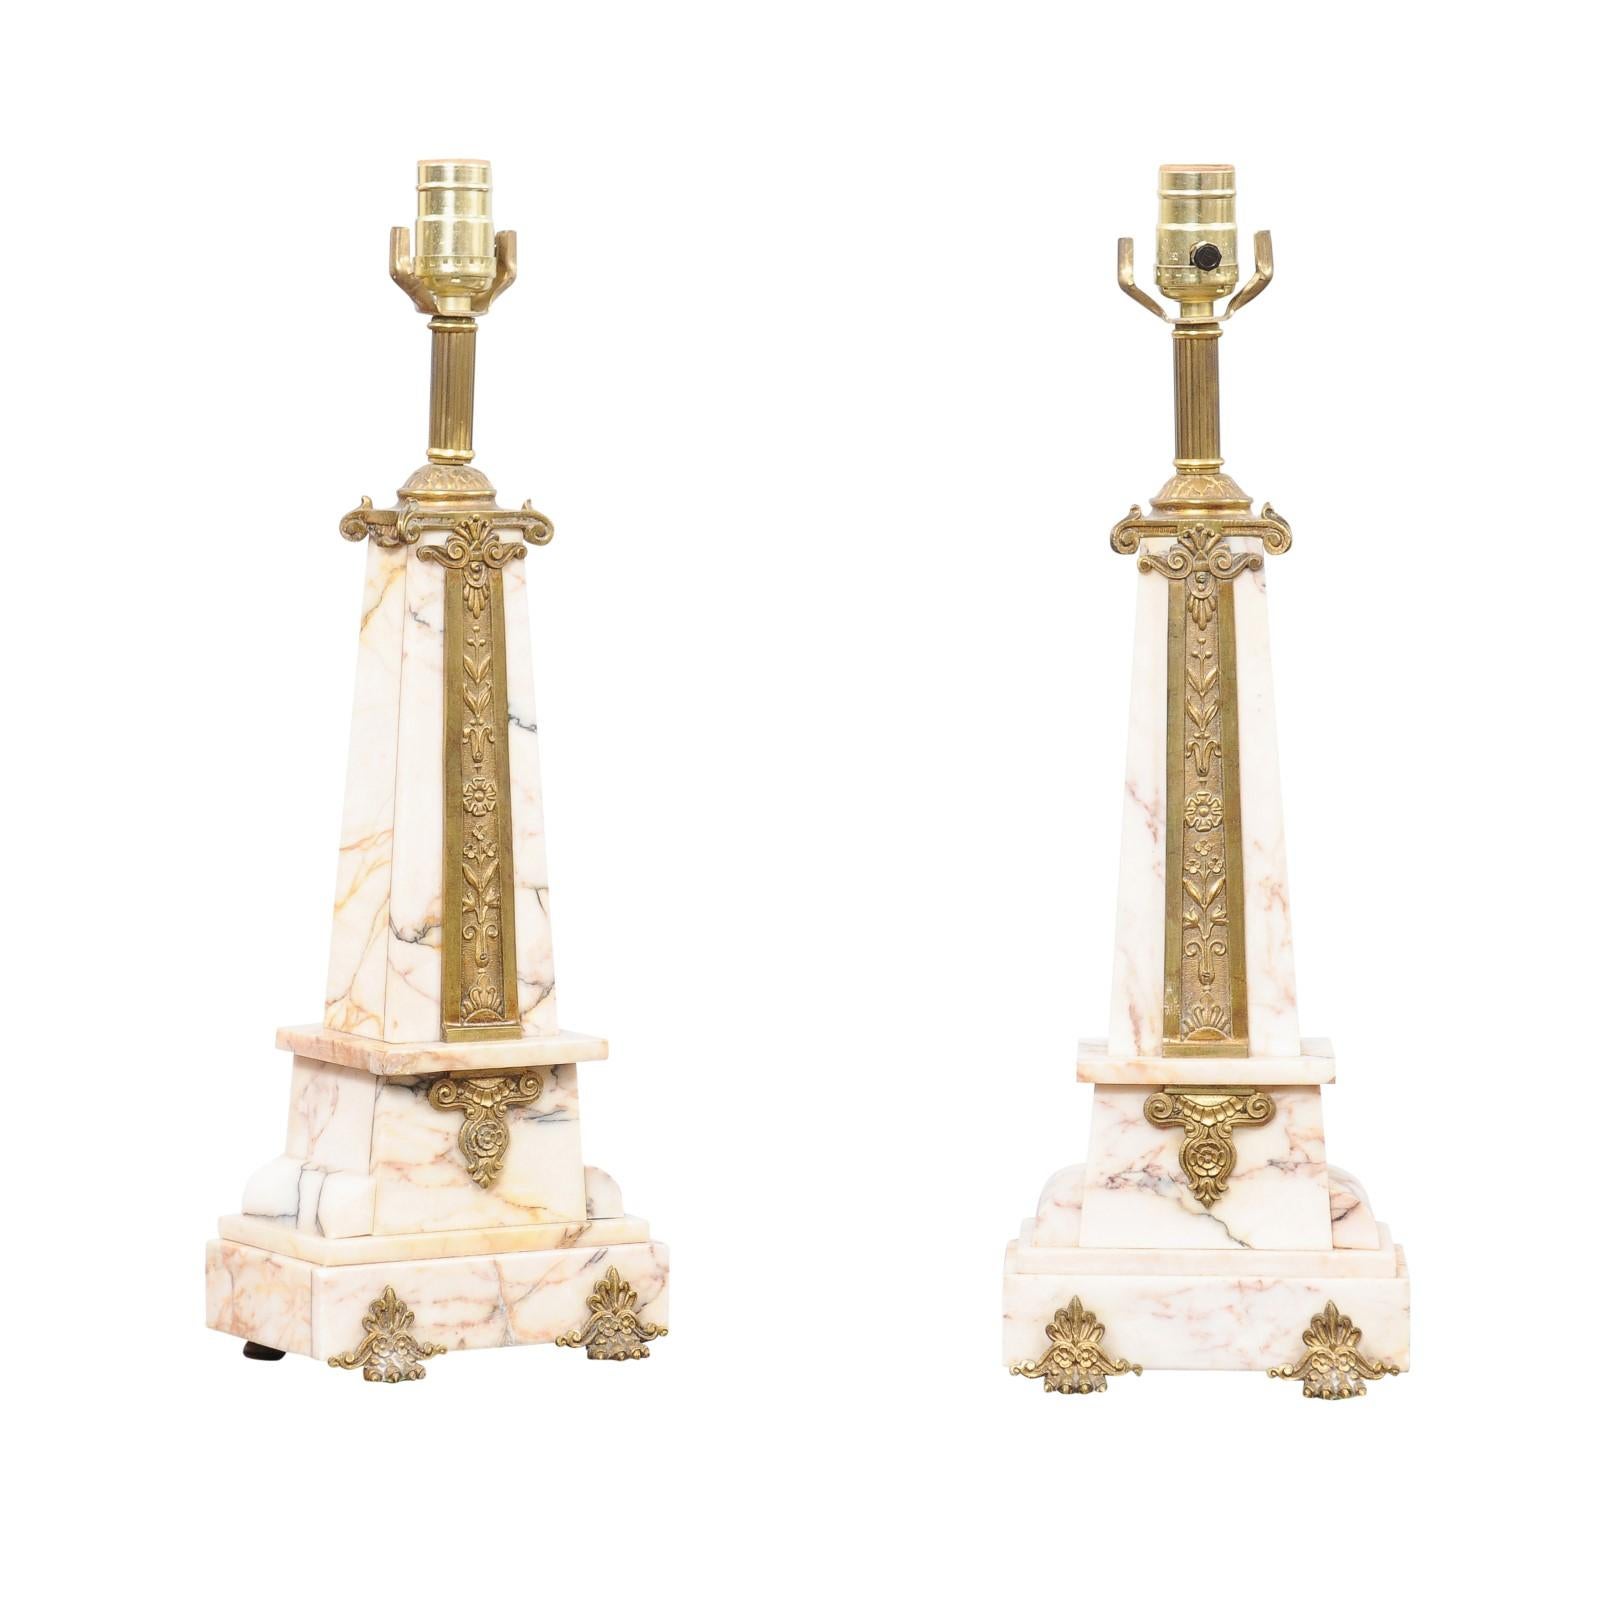 Pair of Art Deco Marble Lamps with Gilt Bronze Mounts, ca. 1920

29.25″ H (to finial) X 19.5″ H (to socket) X 6.5″ W X 5″ D